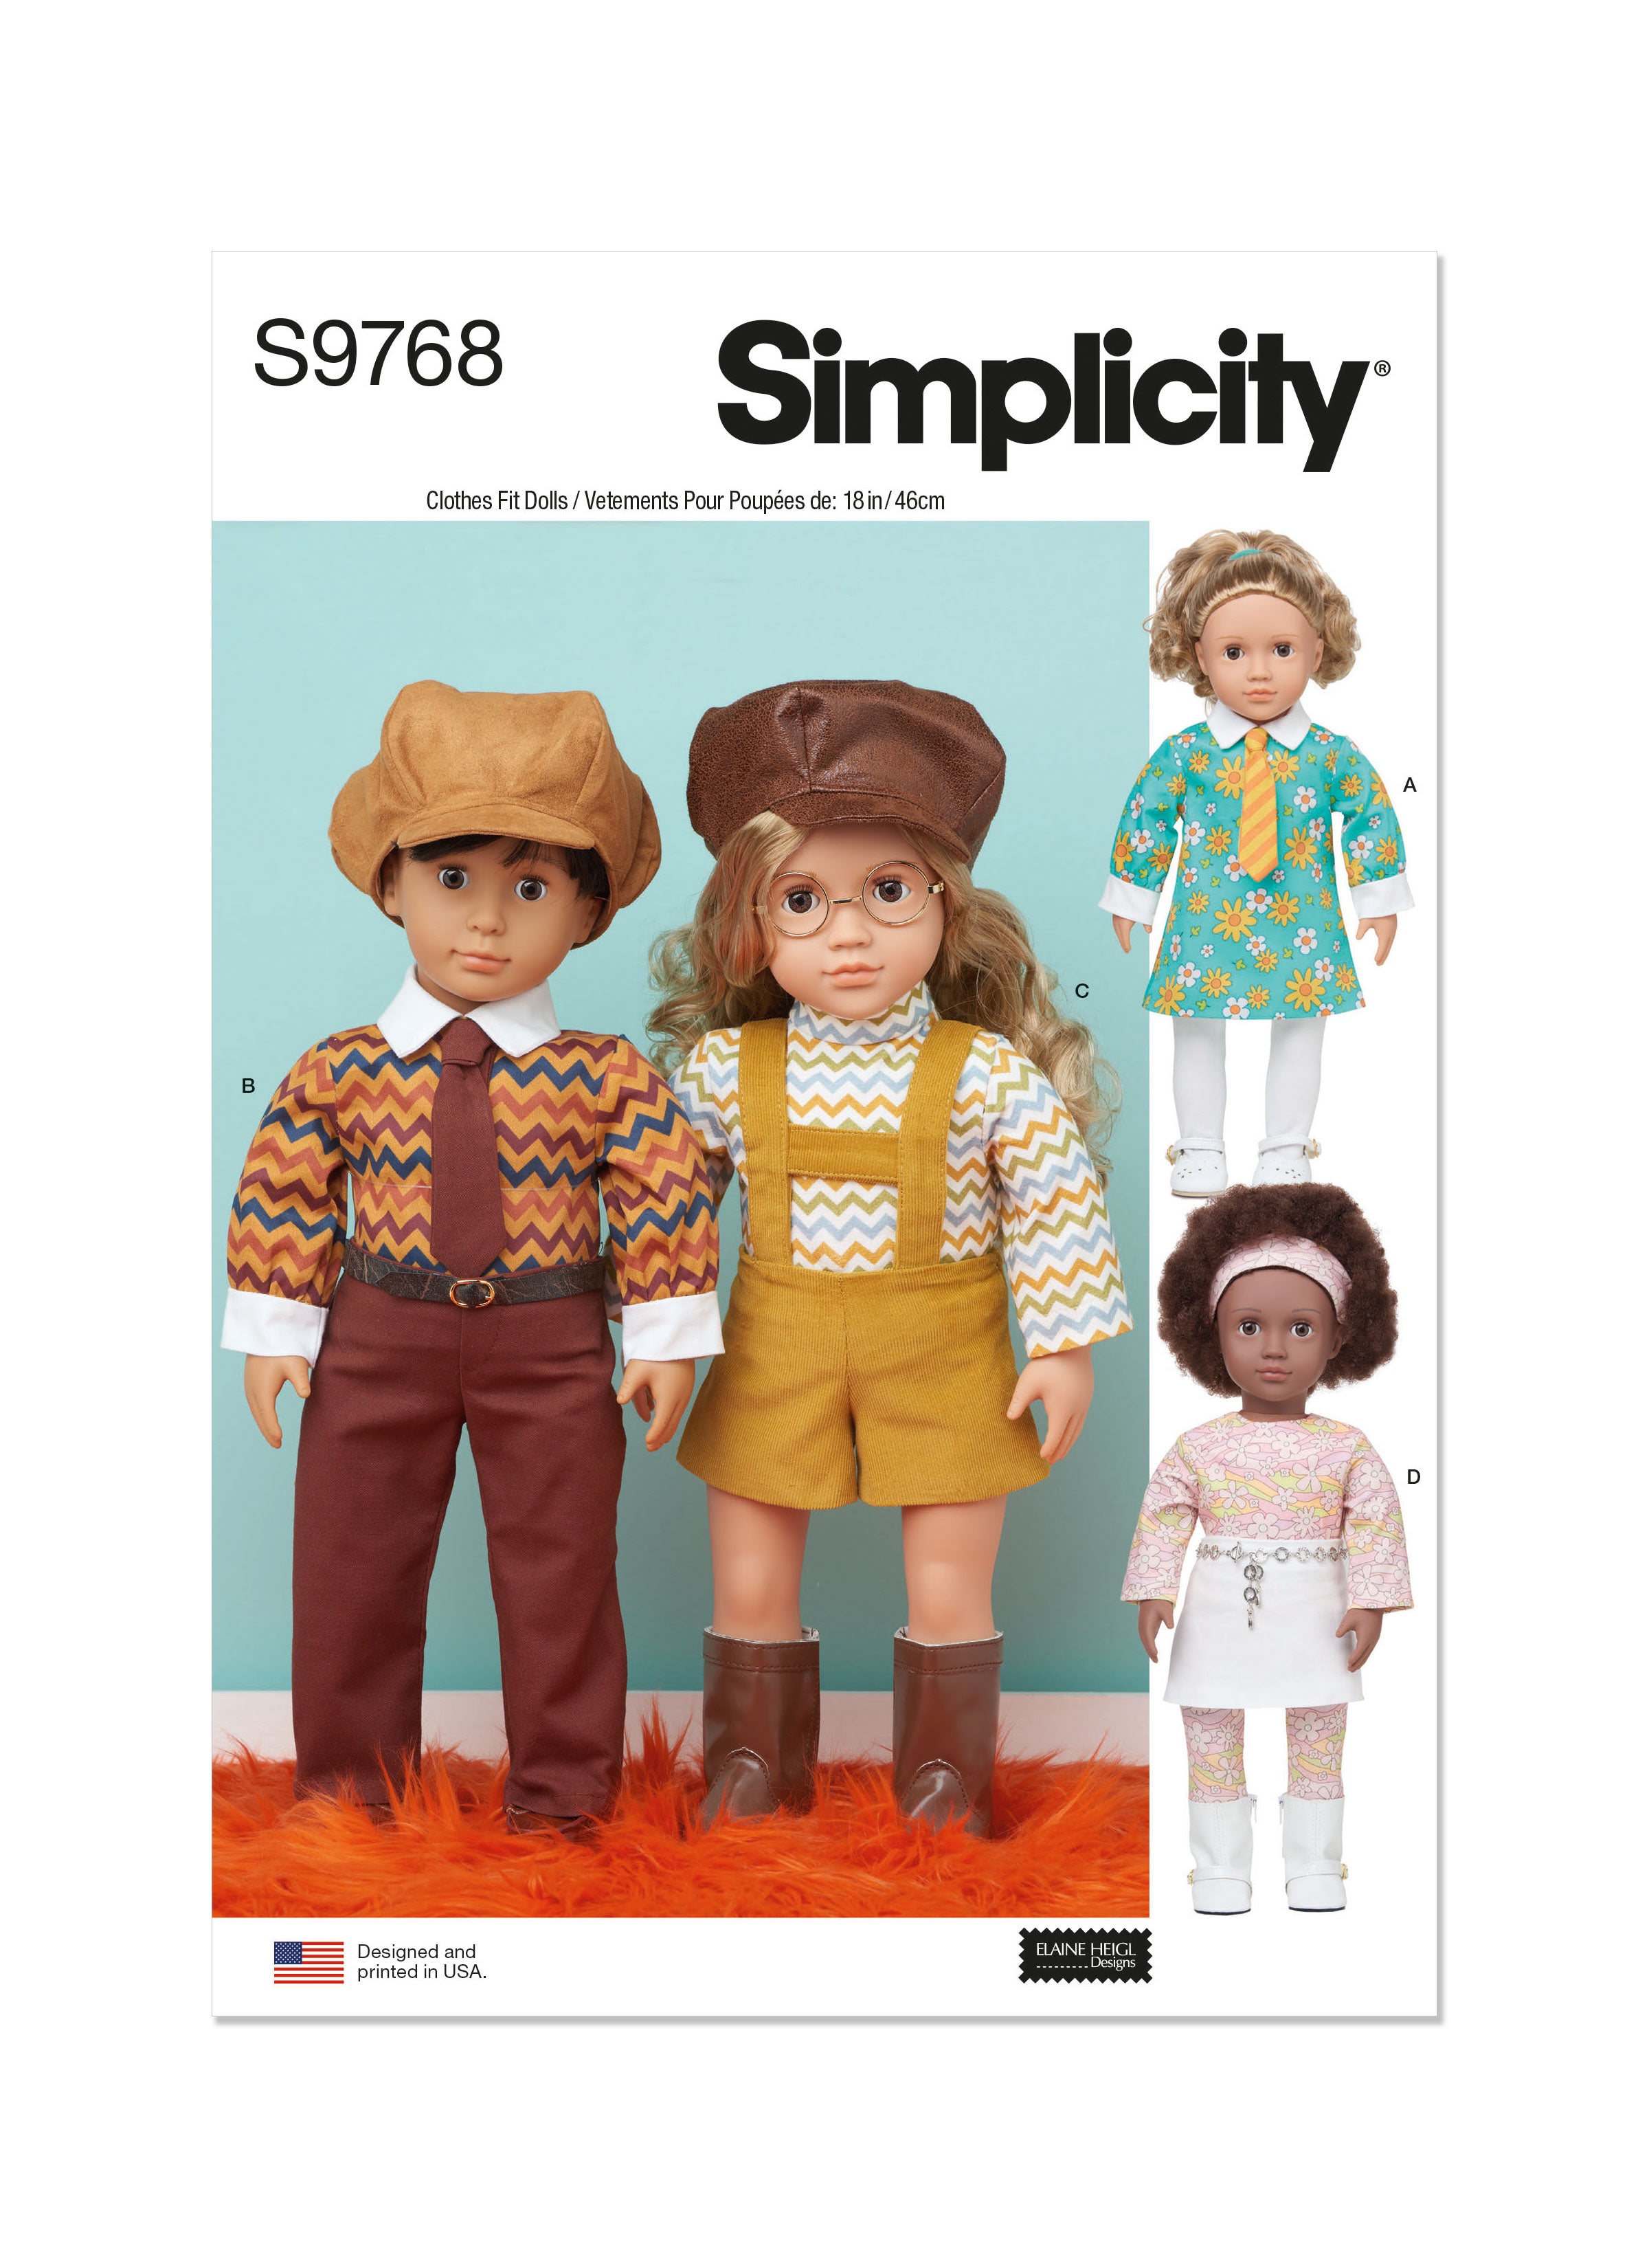 Simplicity 9768 sewing pattern 18" Doll Clothes by Elaine Heigl Designs from Jaycotts Sewing Supplies